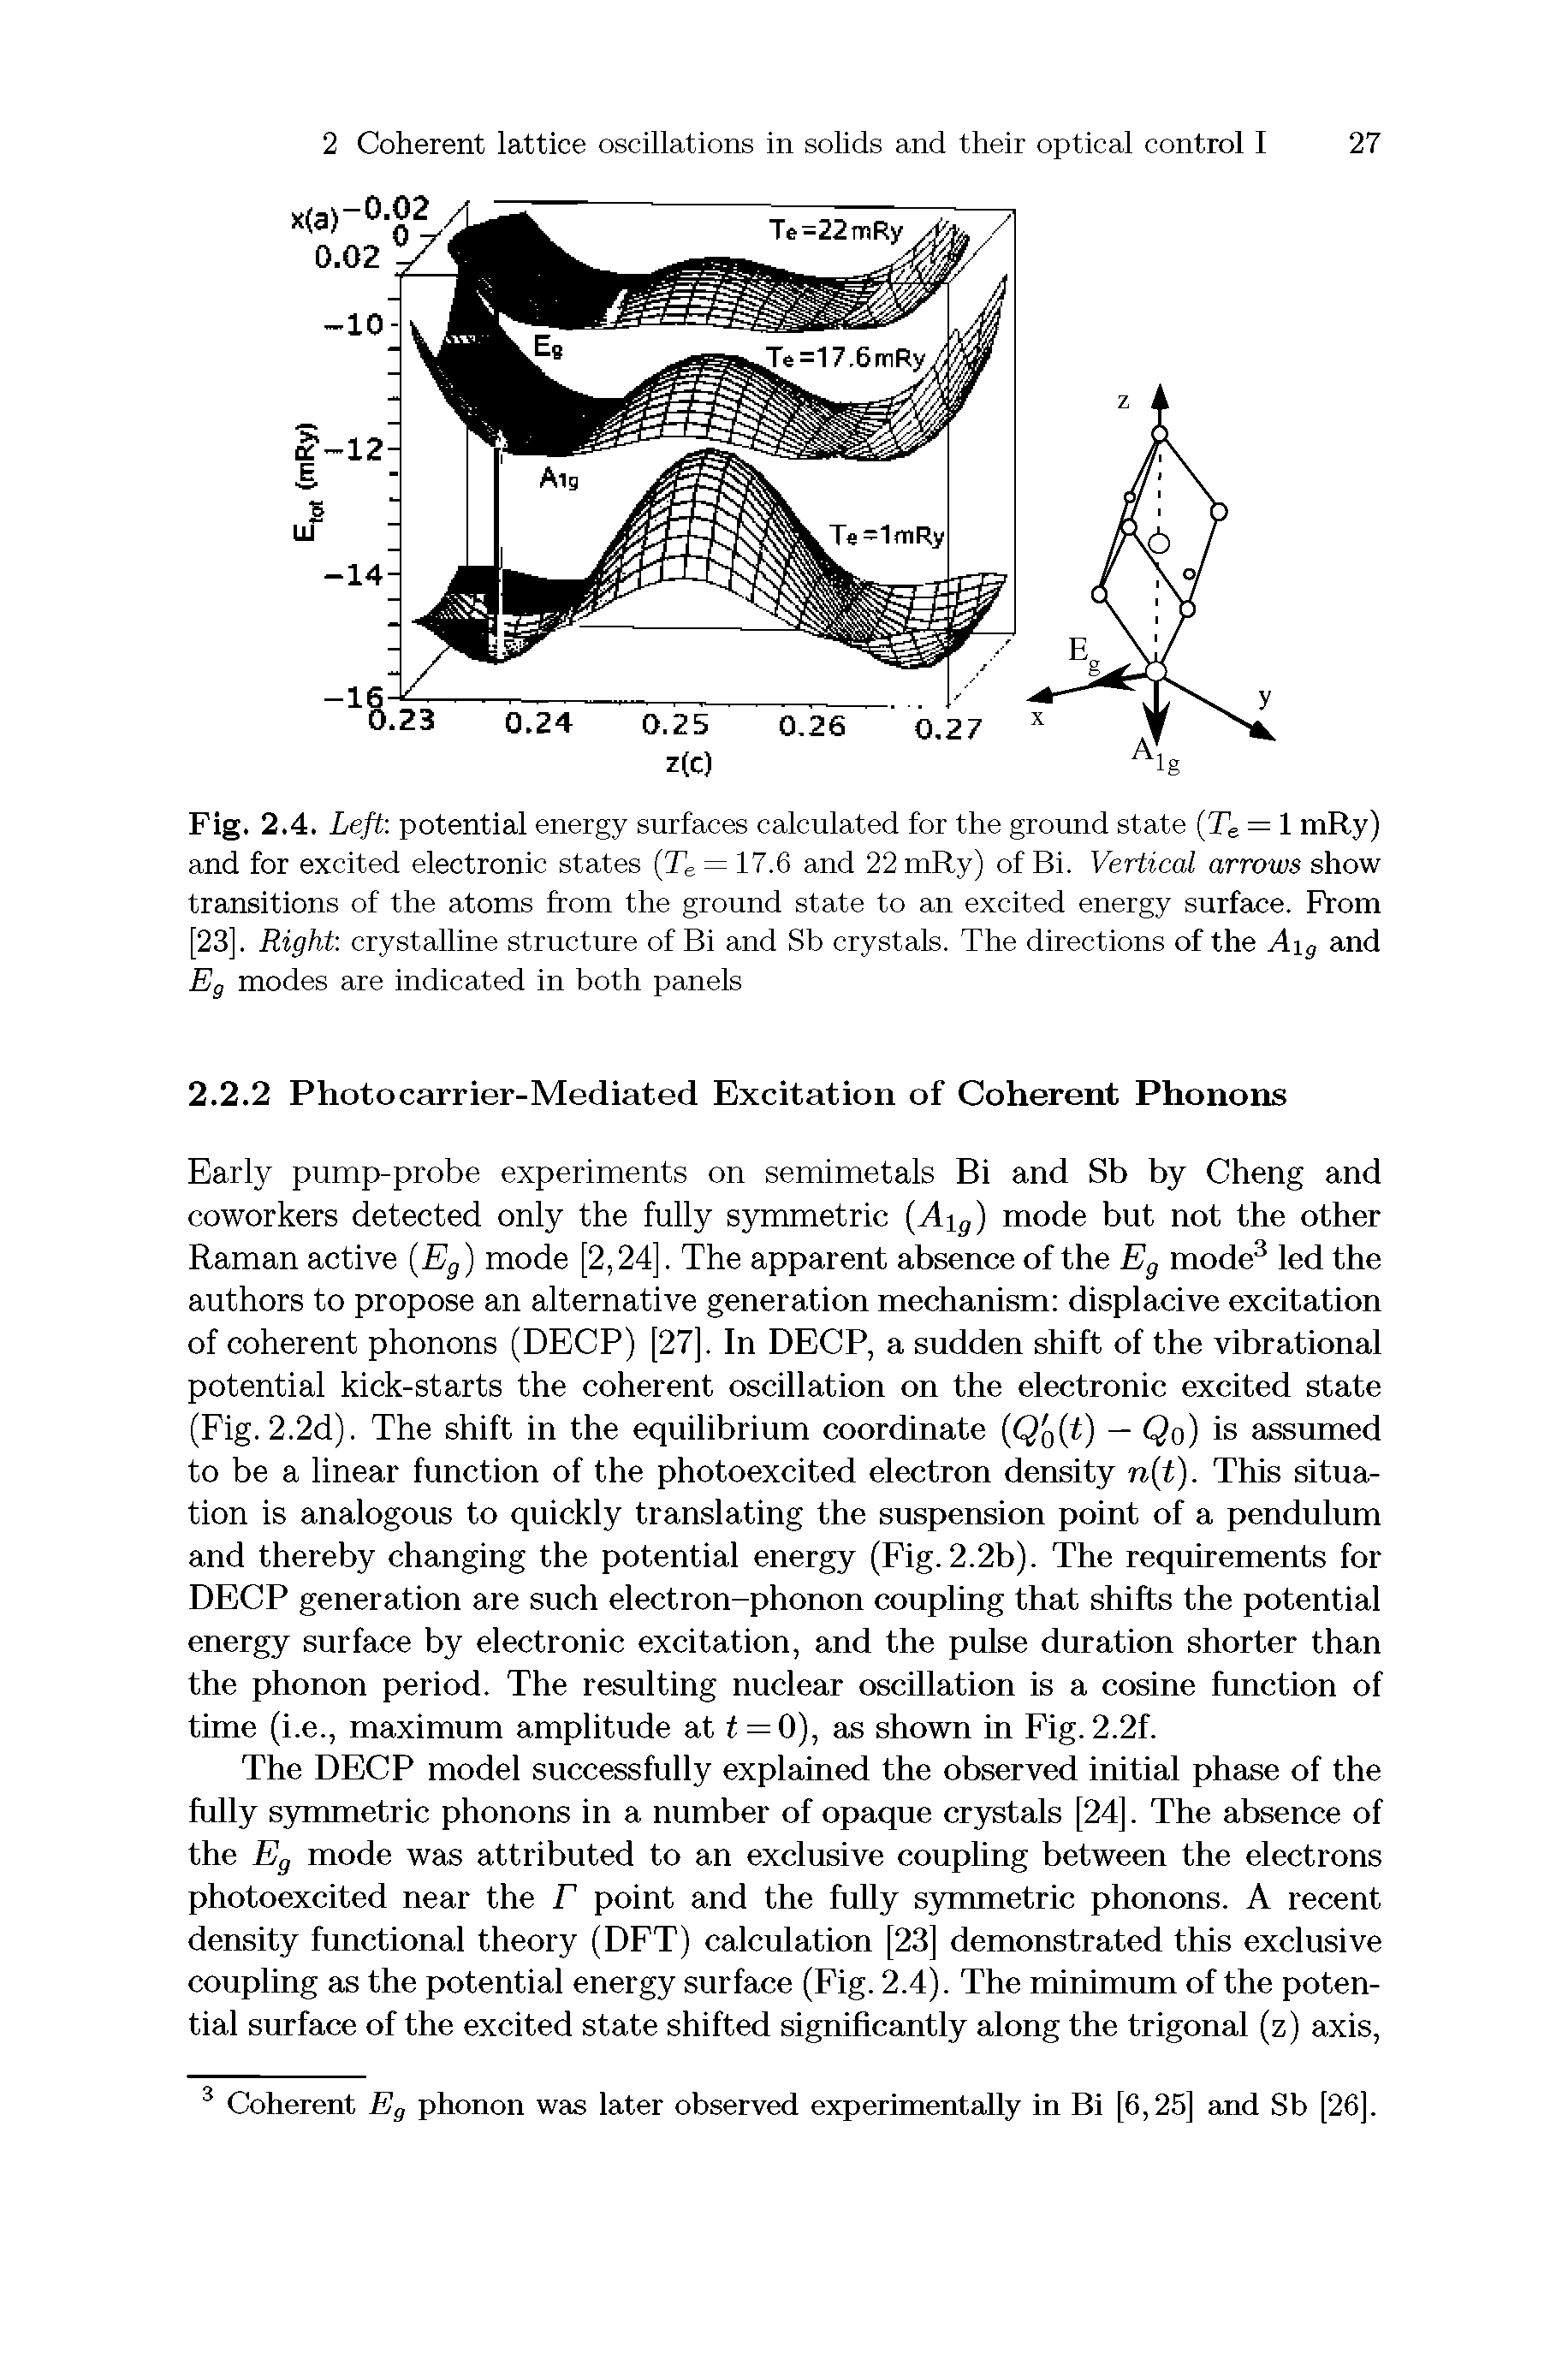 Fig. 2.4. Left potential energy surfaces calculated for the ground state (Te = 1 mRy) and for excited electronic states (Te = 17.6 and 22 mRy) of Bi. Vertical arrows show transitions of the atoms from the ground state to an excited energy surface. From [23], Right crystalline structure of Bi and Sb crystals. The directions of the Aig and Eg modes are indicated in both panels...